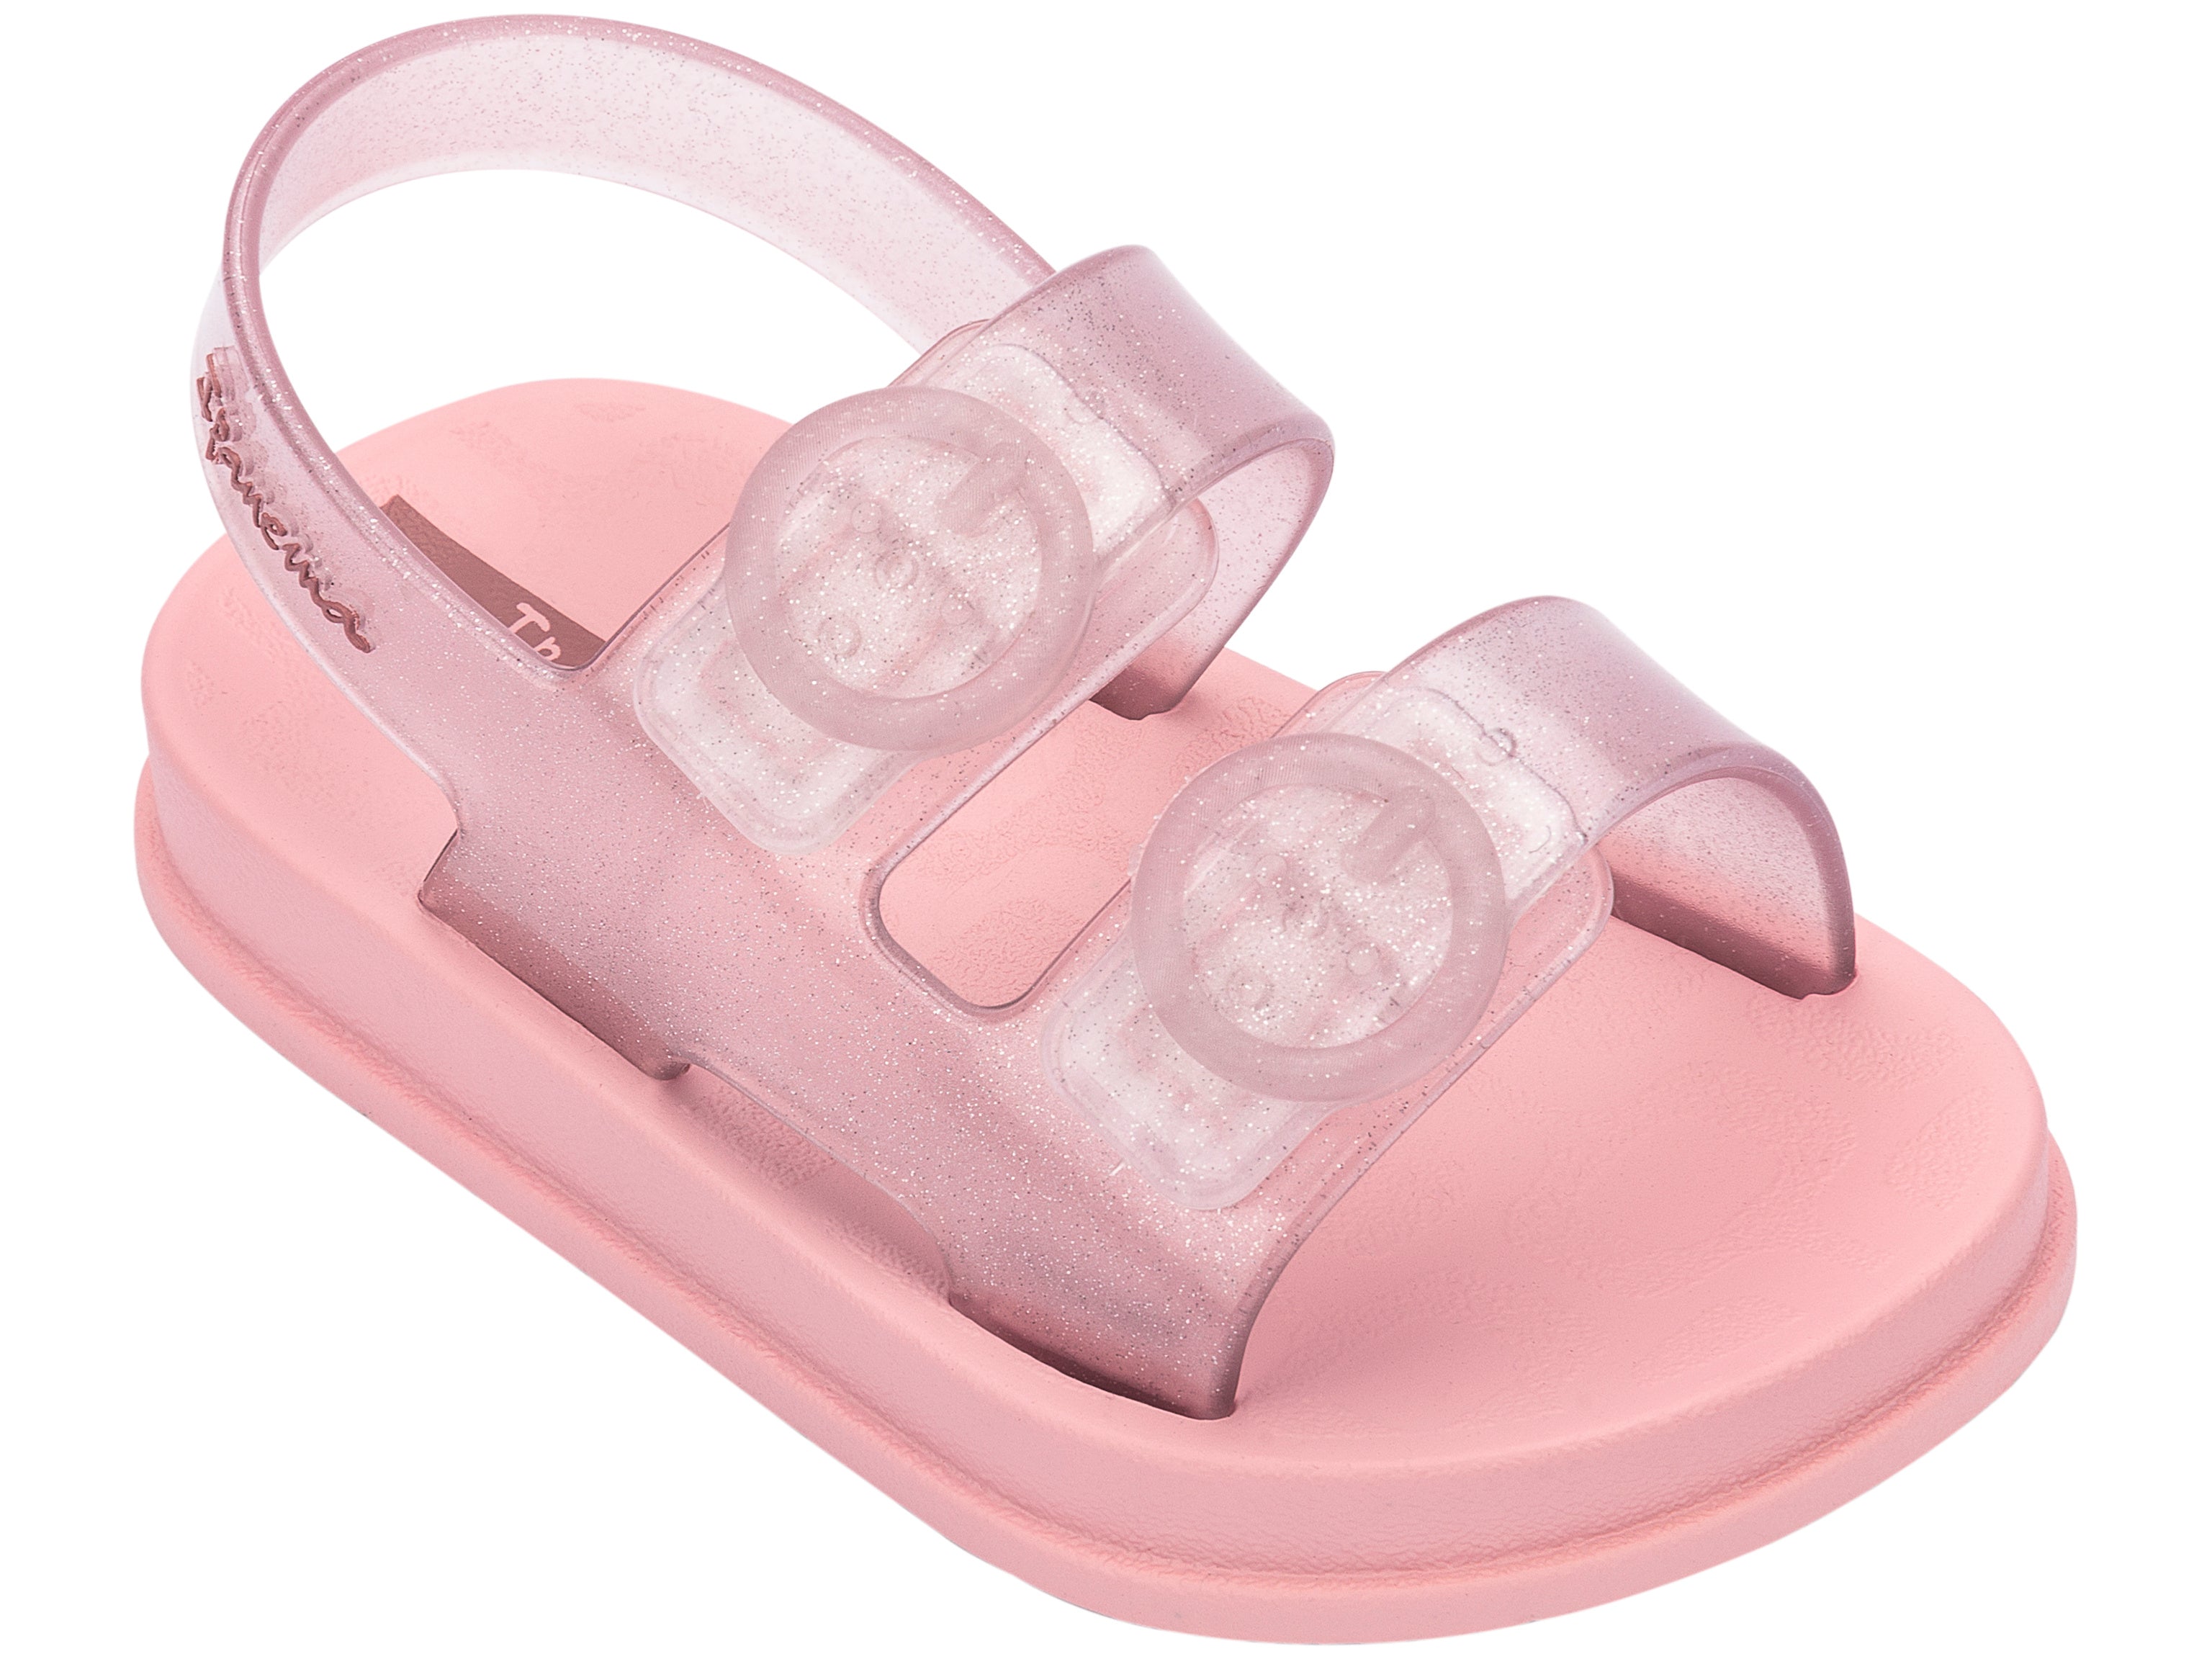 Angled view of a light pink Ipanema Follow baby sandal with two decorative buckles on the upper.